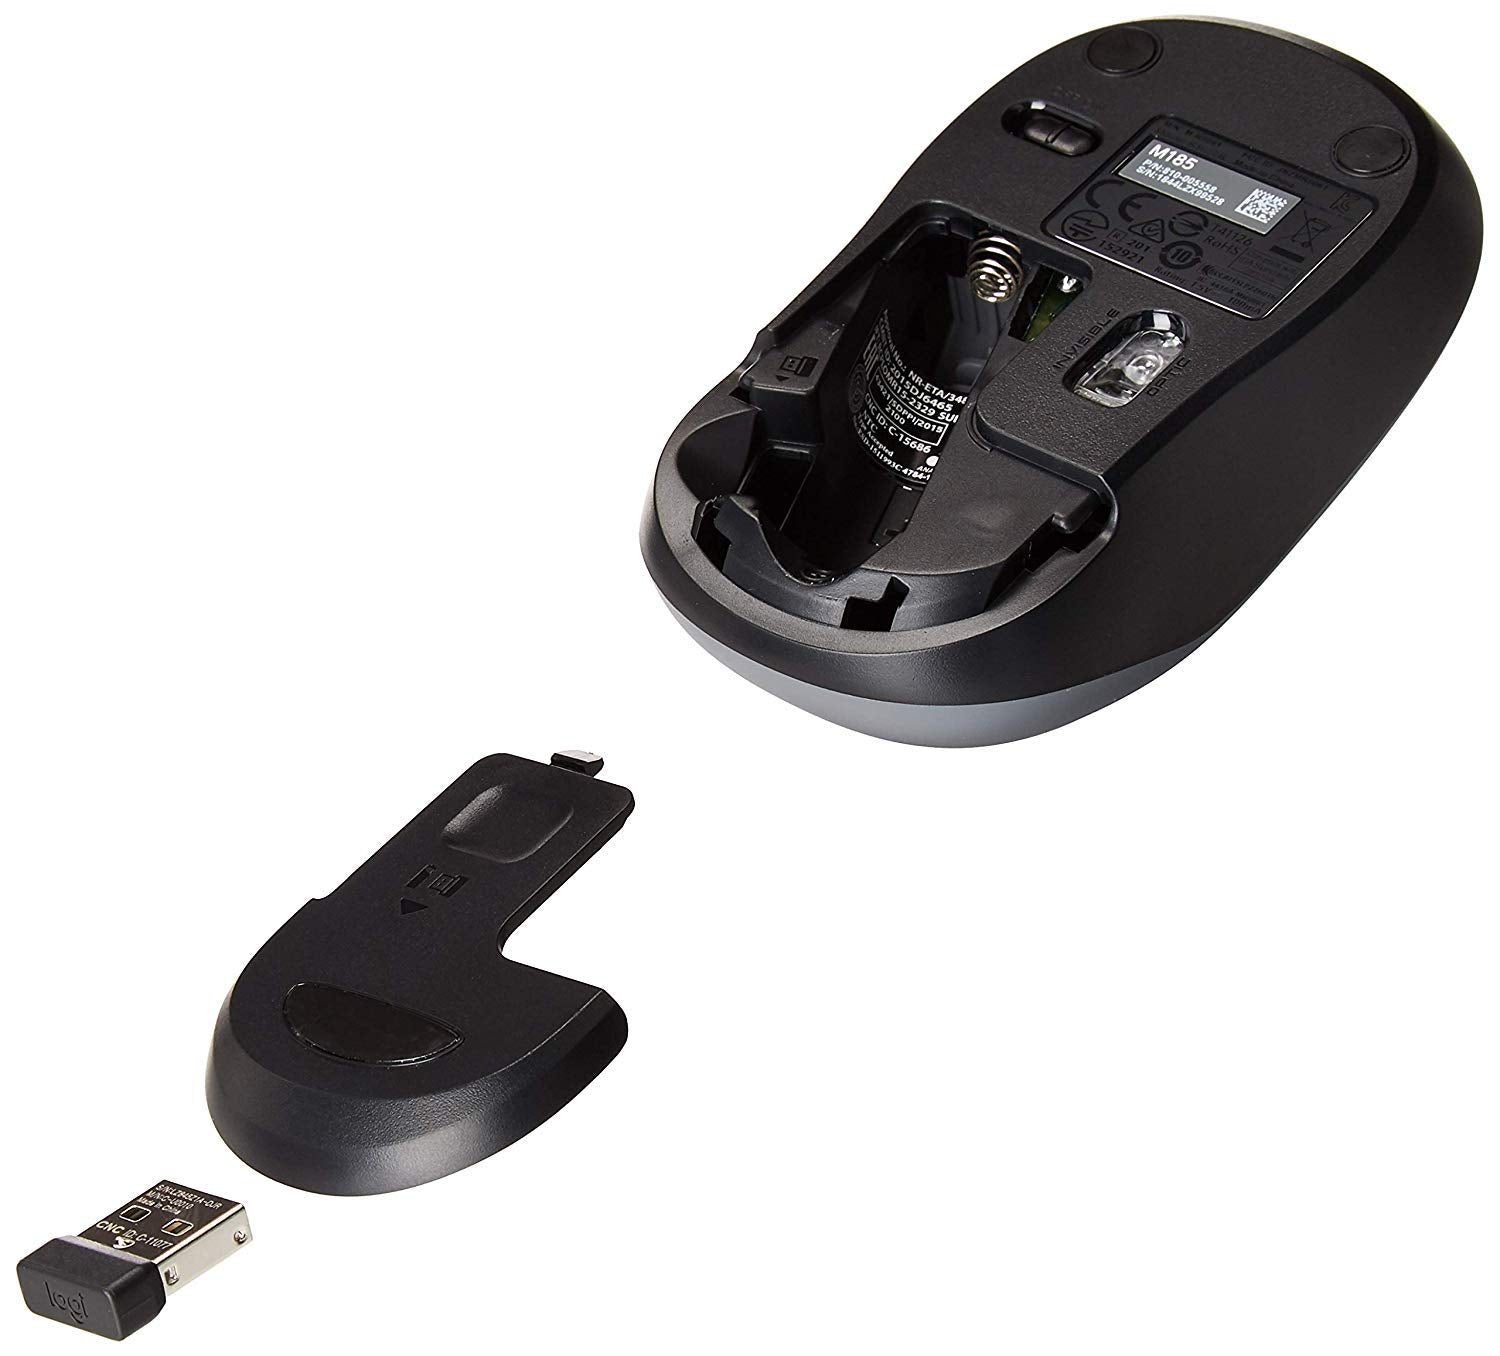 Logitech M185 Wireless Mouse for Computers Laptops Fast Scrolling Bundle (1-Pack + Stylus)